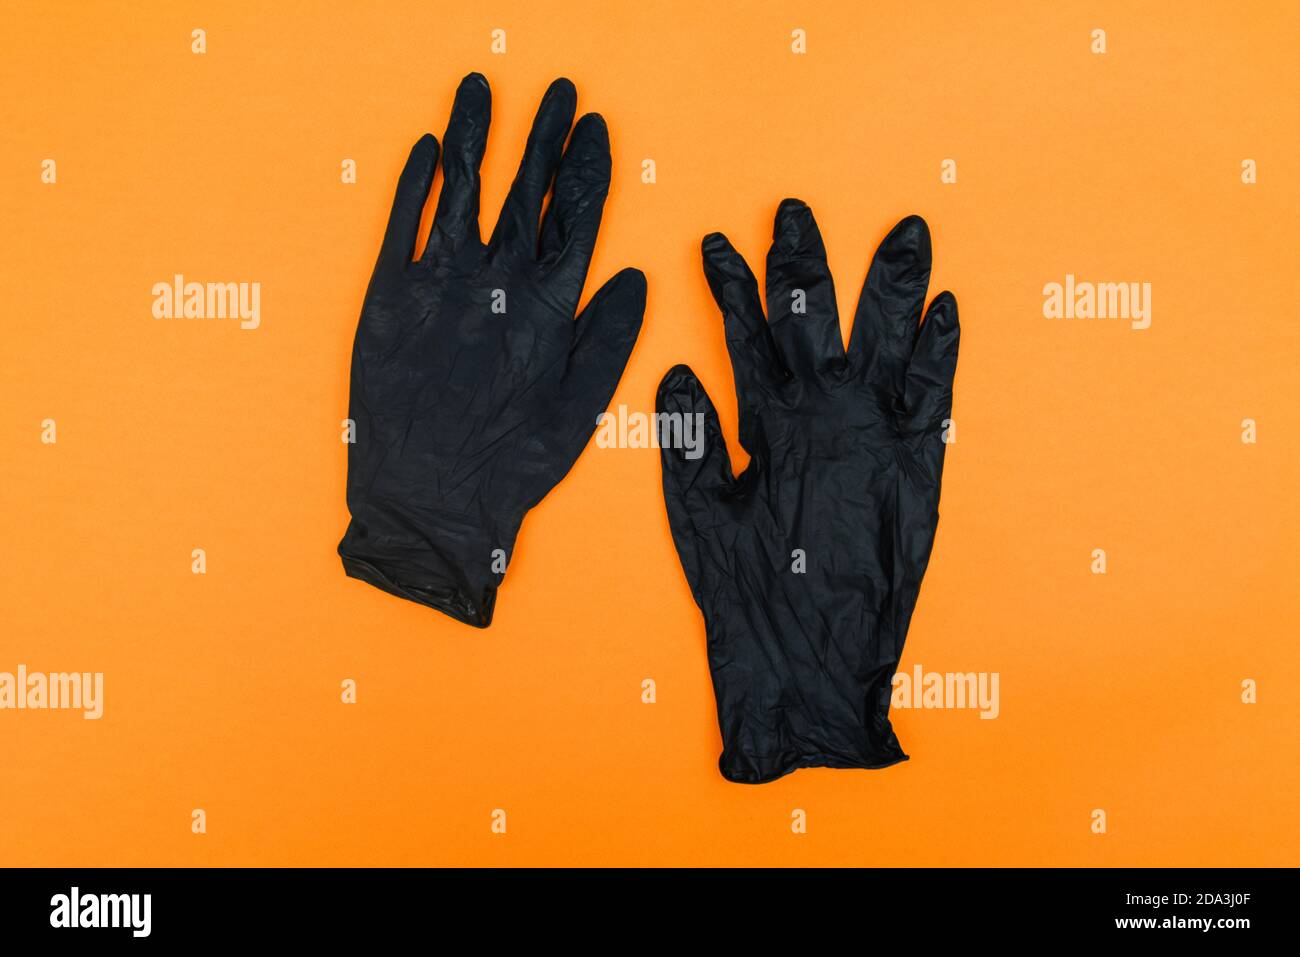 Black disposable gloves isolated on orange background. Hand protection from coronavirus, hygiene. Top view, flat lay Stock Photo